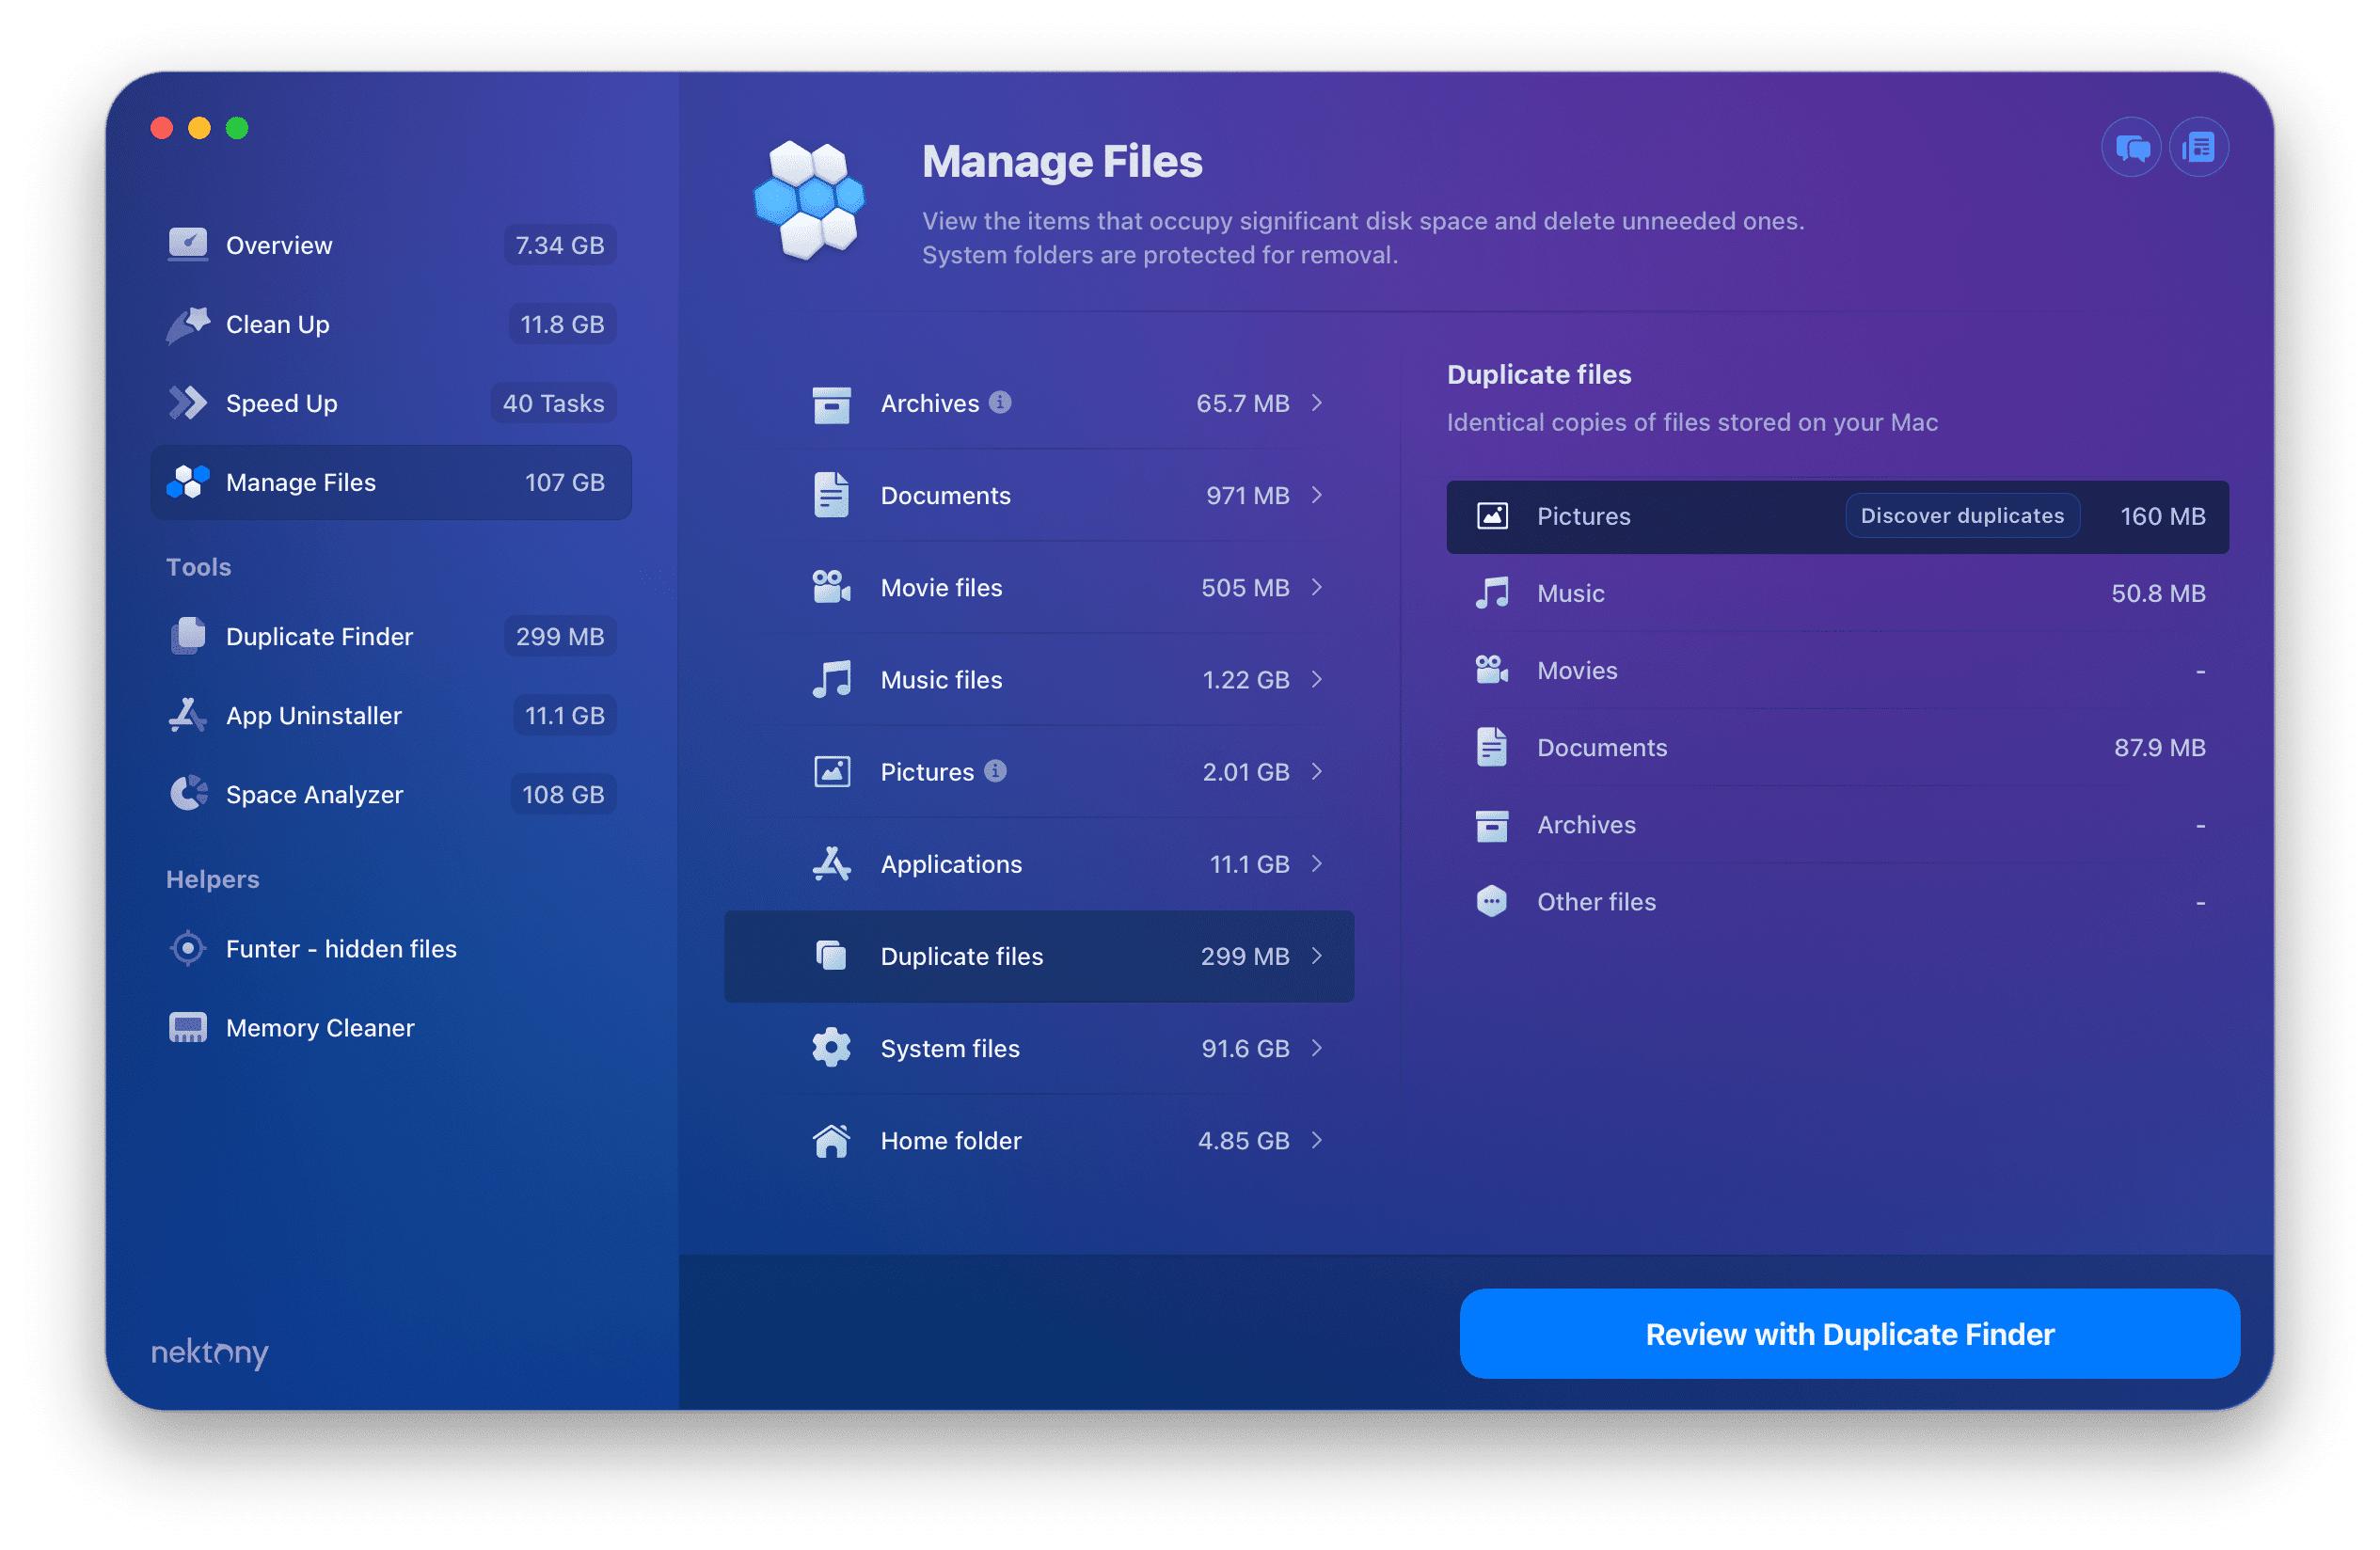 Manage files section in MacCleaner Pro